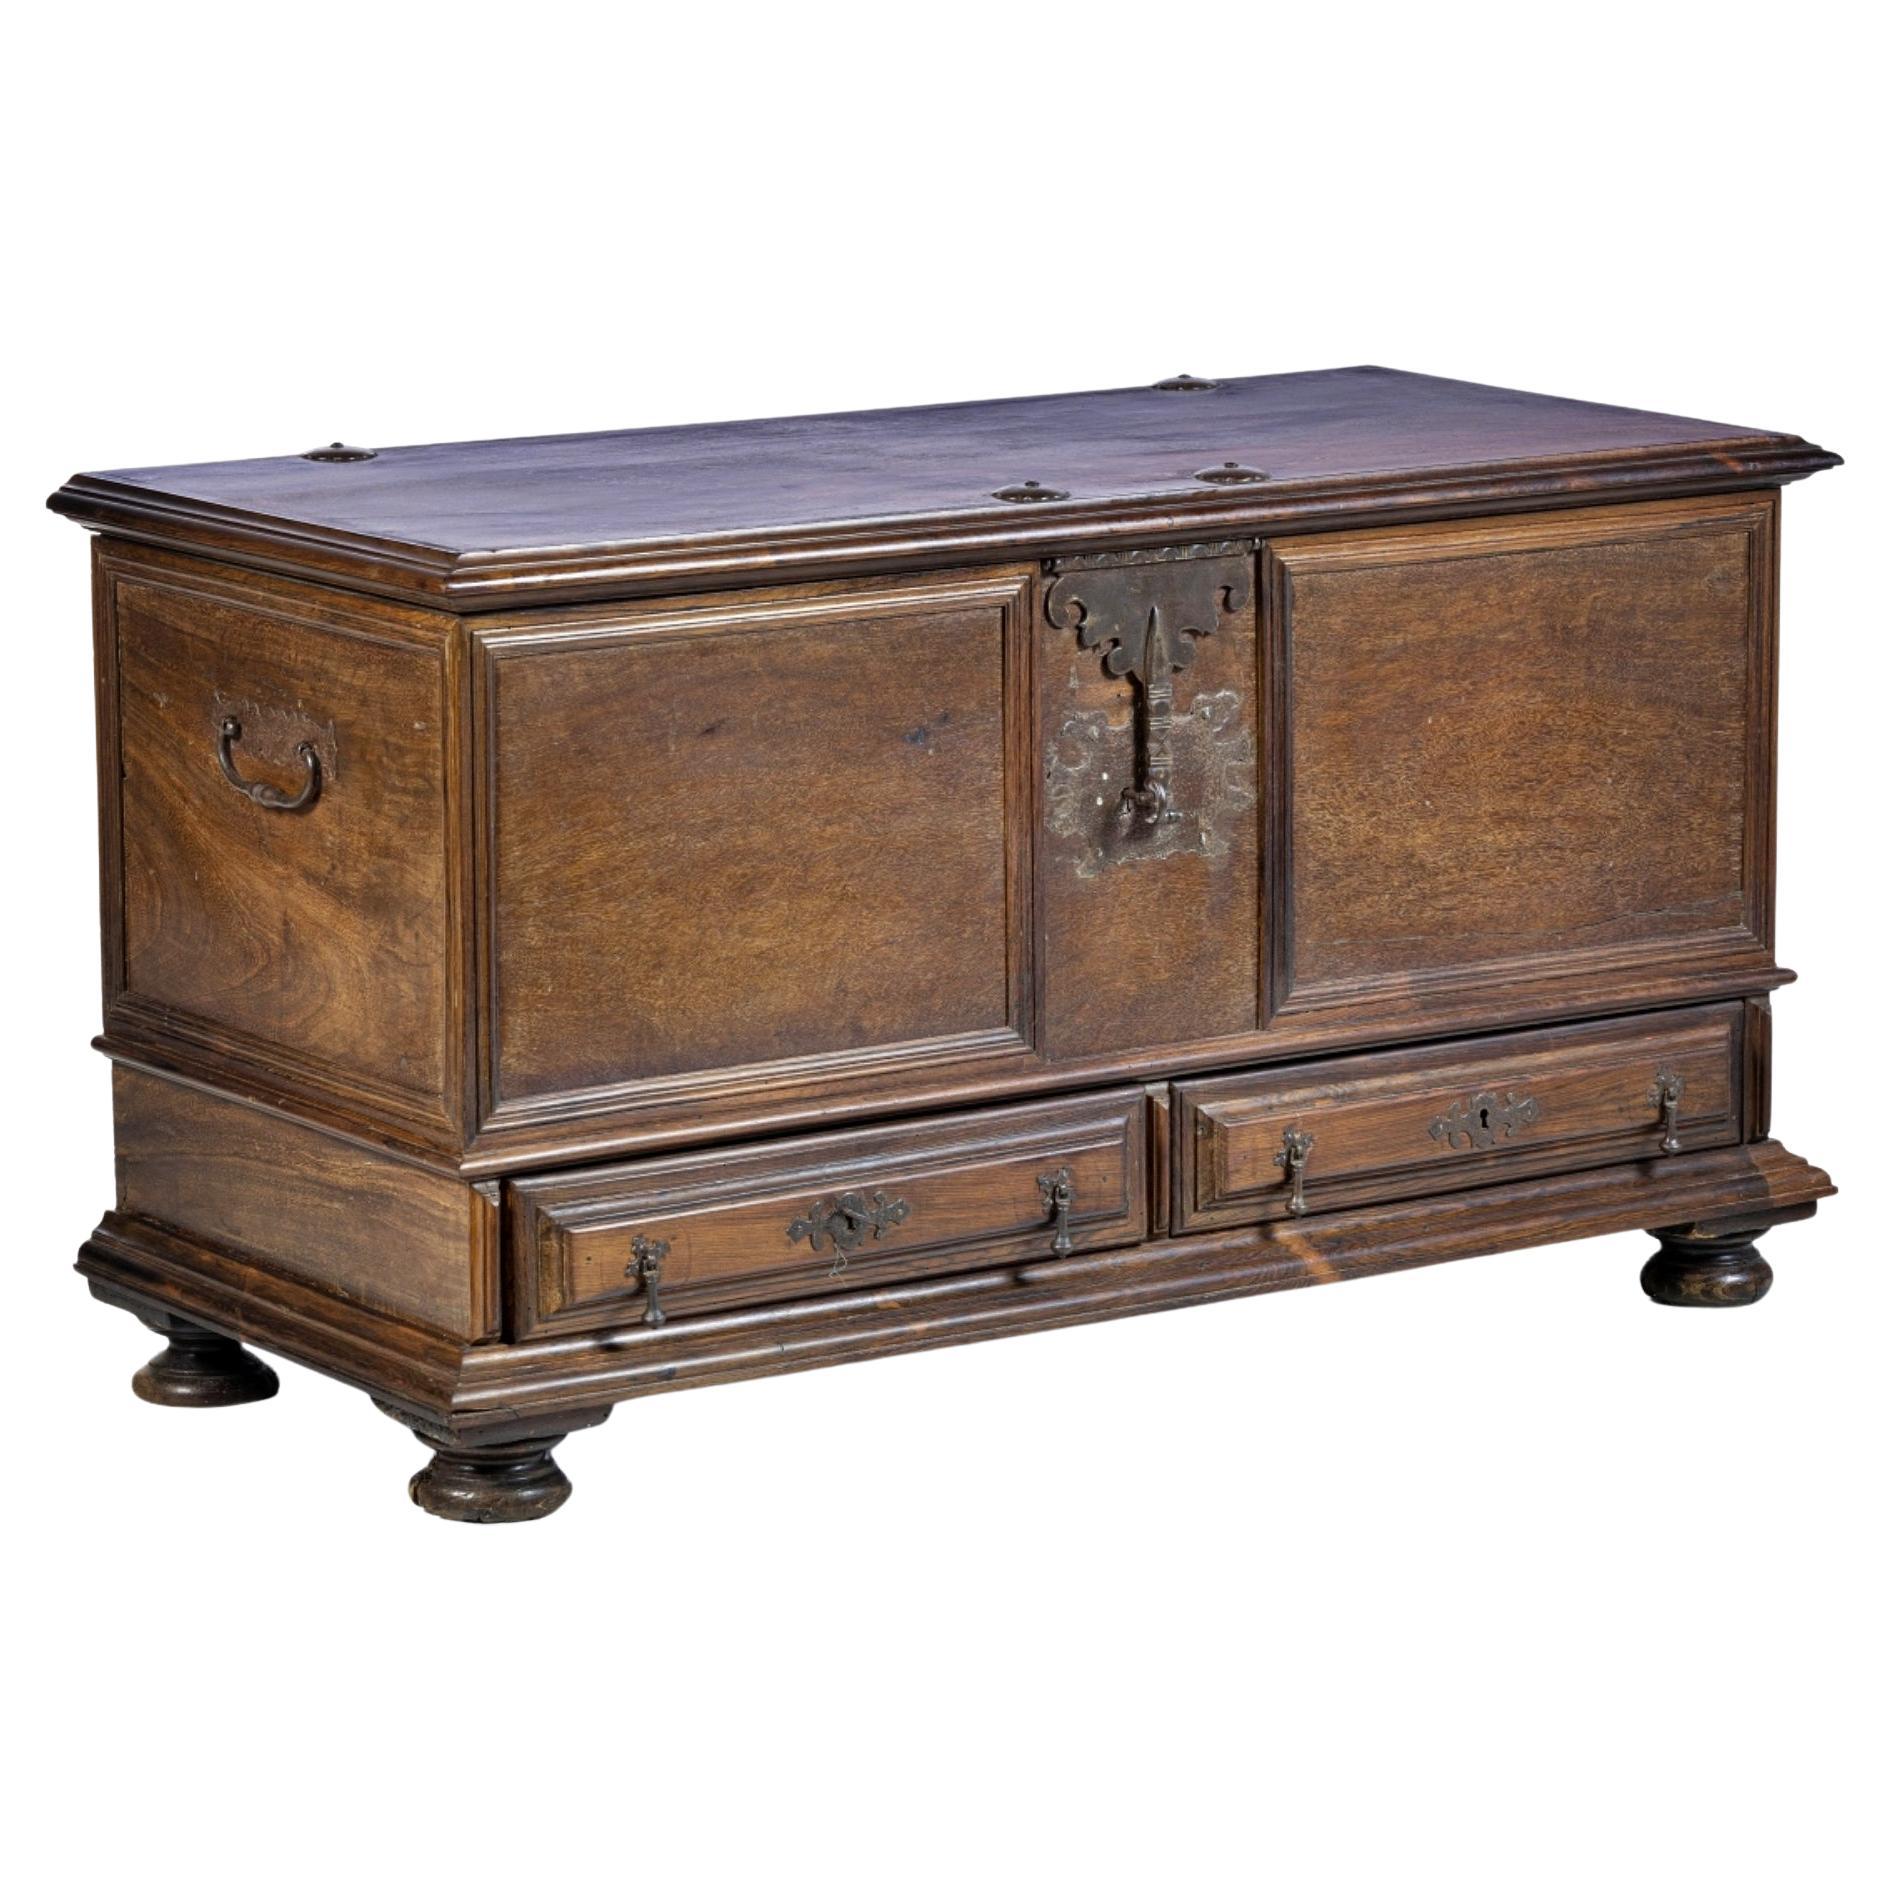 PORTUGUESE ROSEWOOD CHEST WITH TWO DRAWERS 17. Jahrhundert